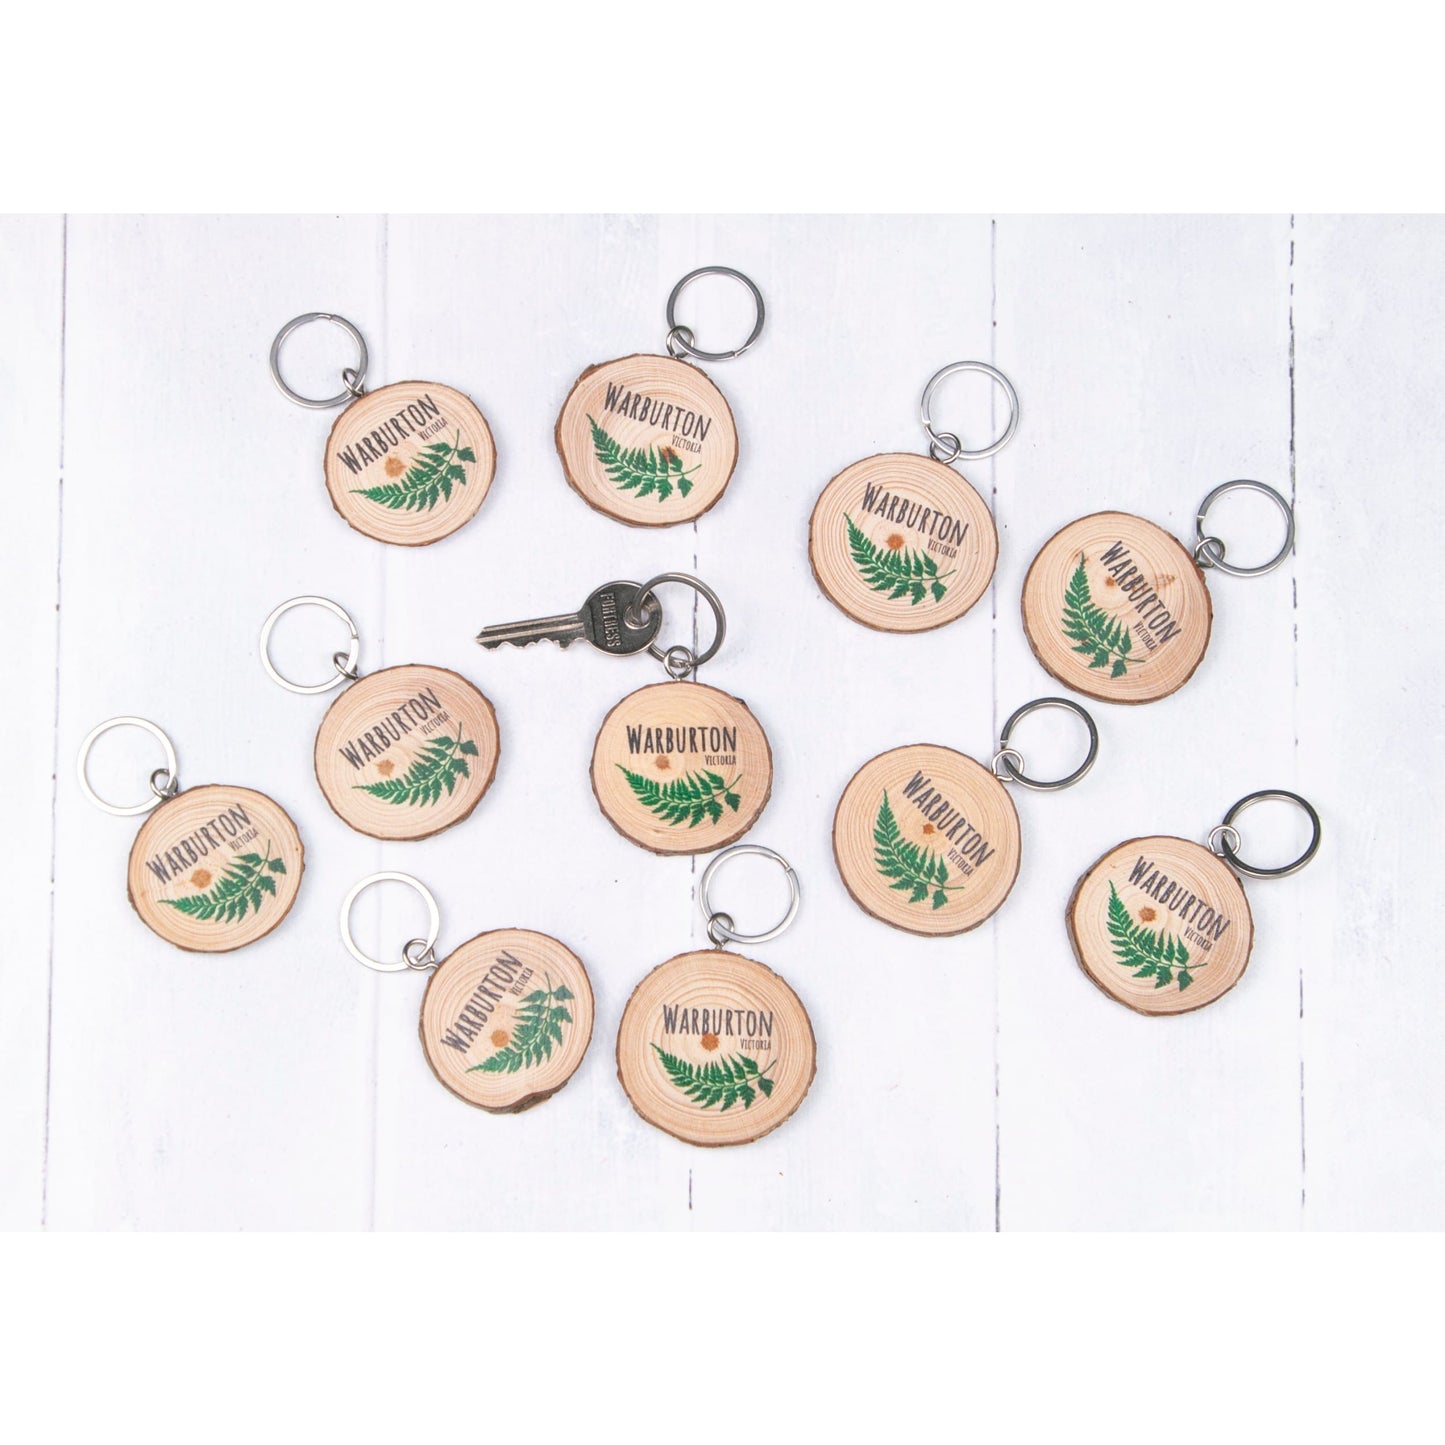 Wood Slice Promotional Keyrings - Promotional Products